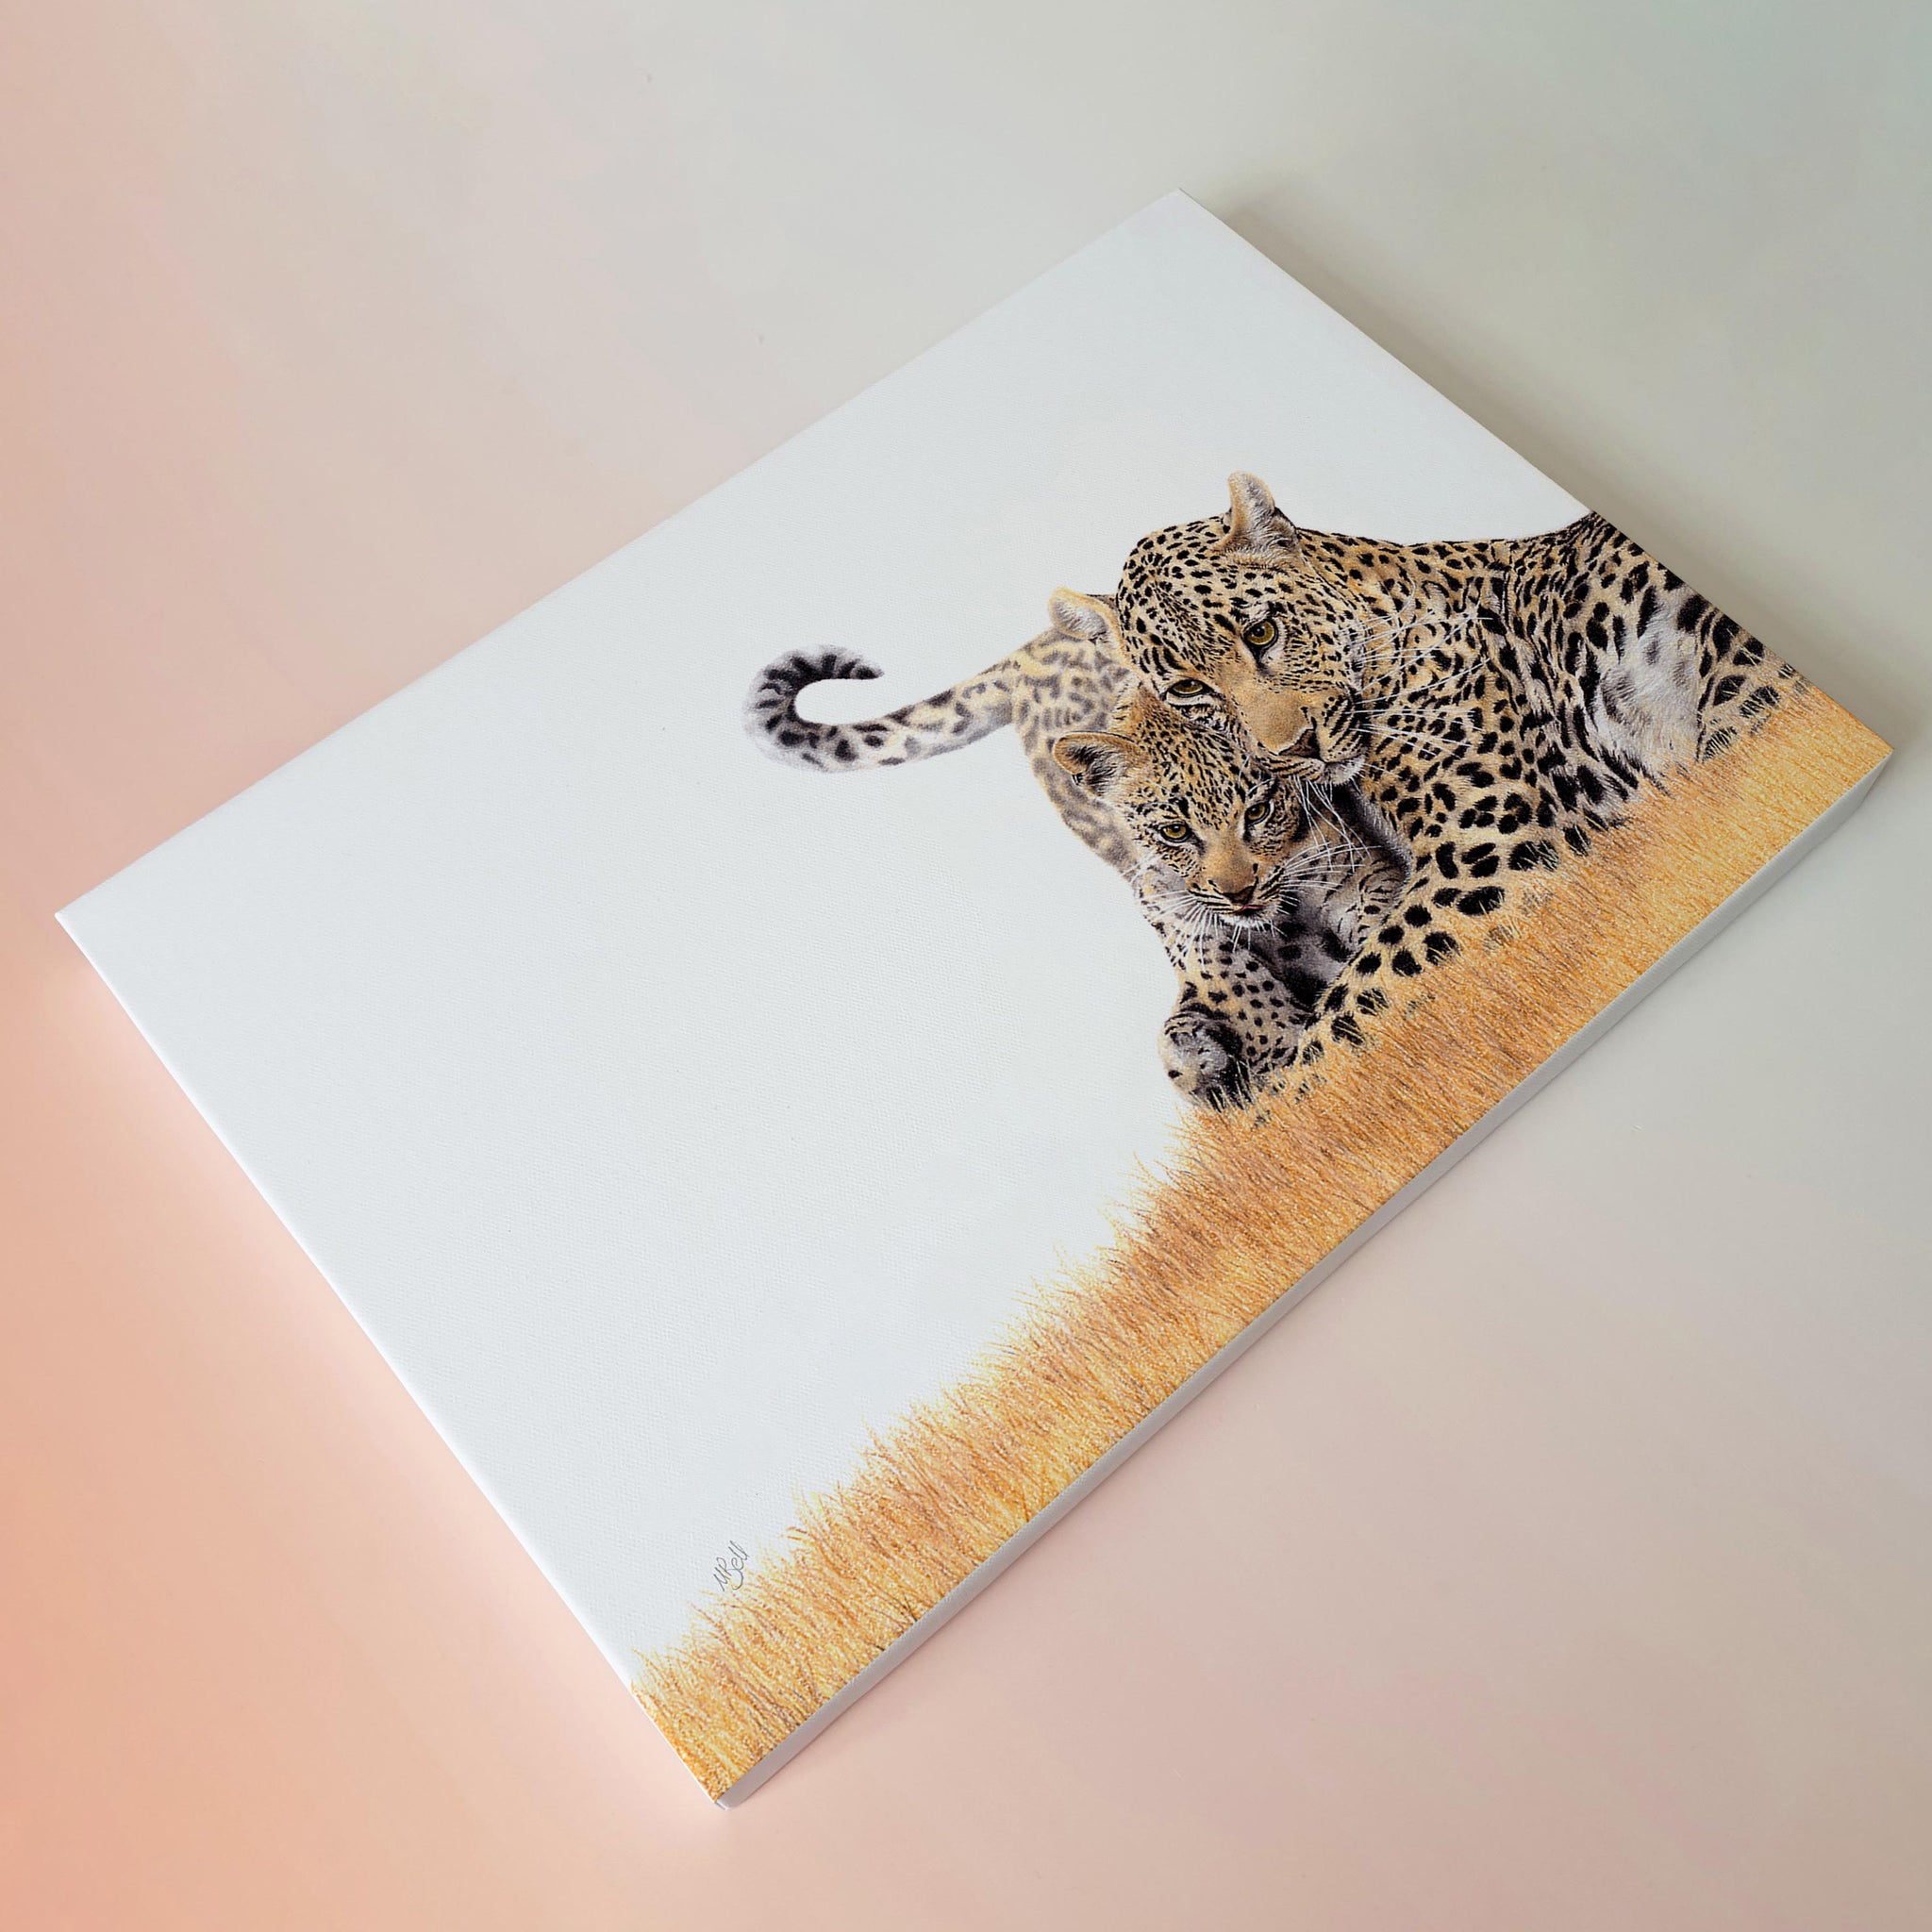 Leopard mother and cub wildlife artwork on canvas print